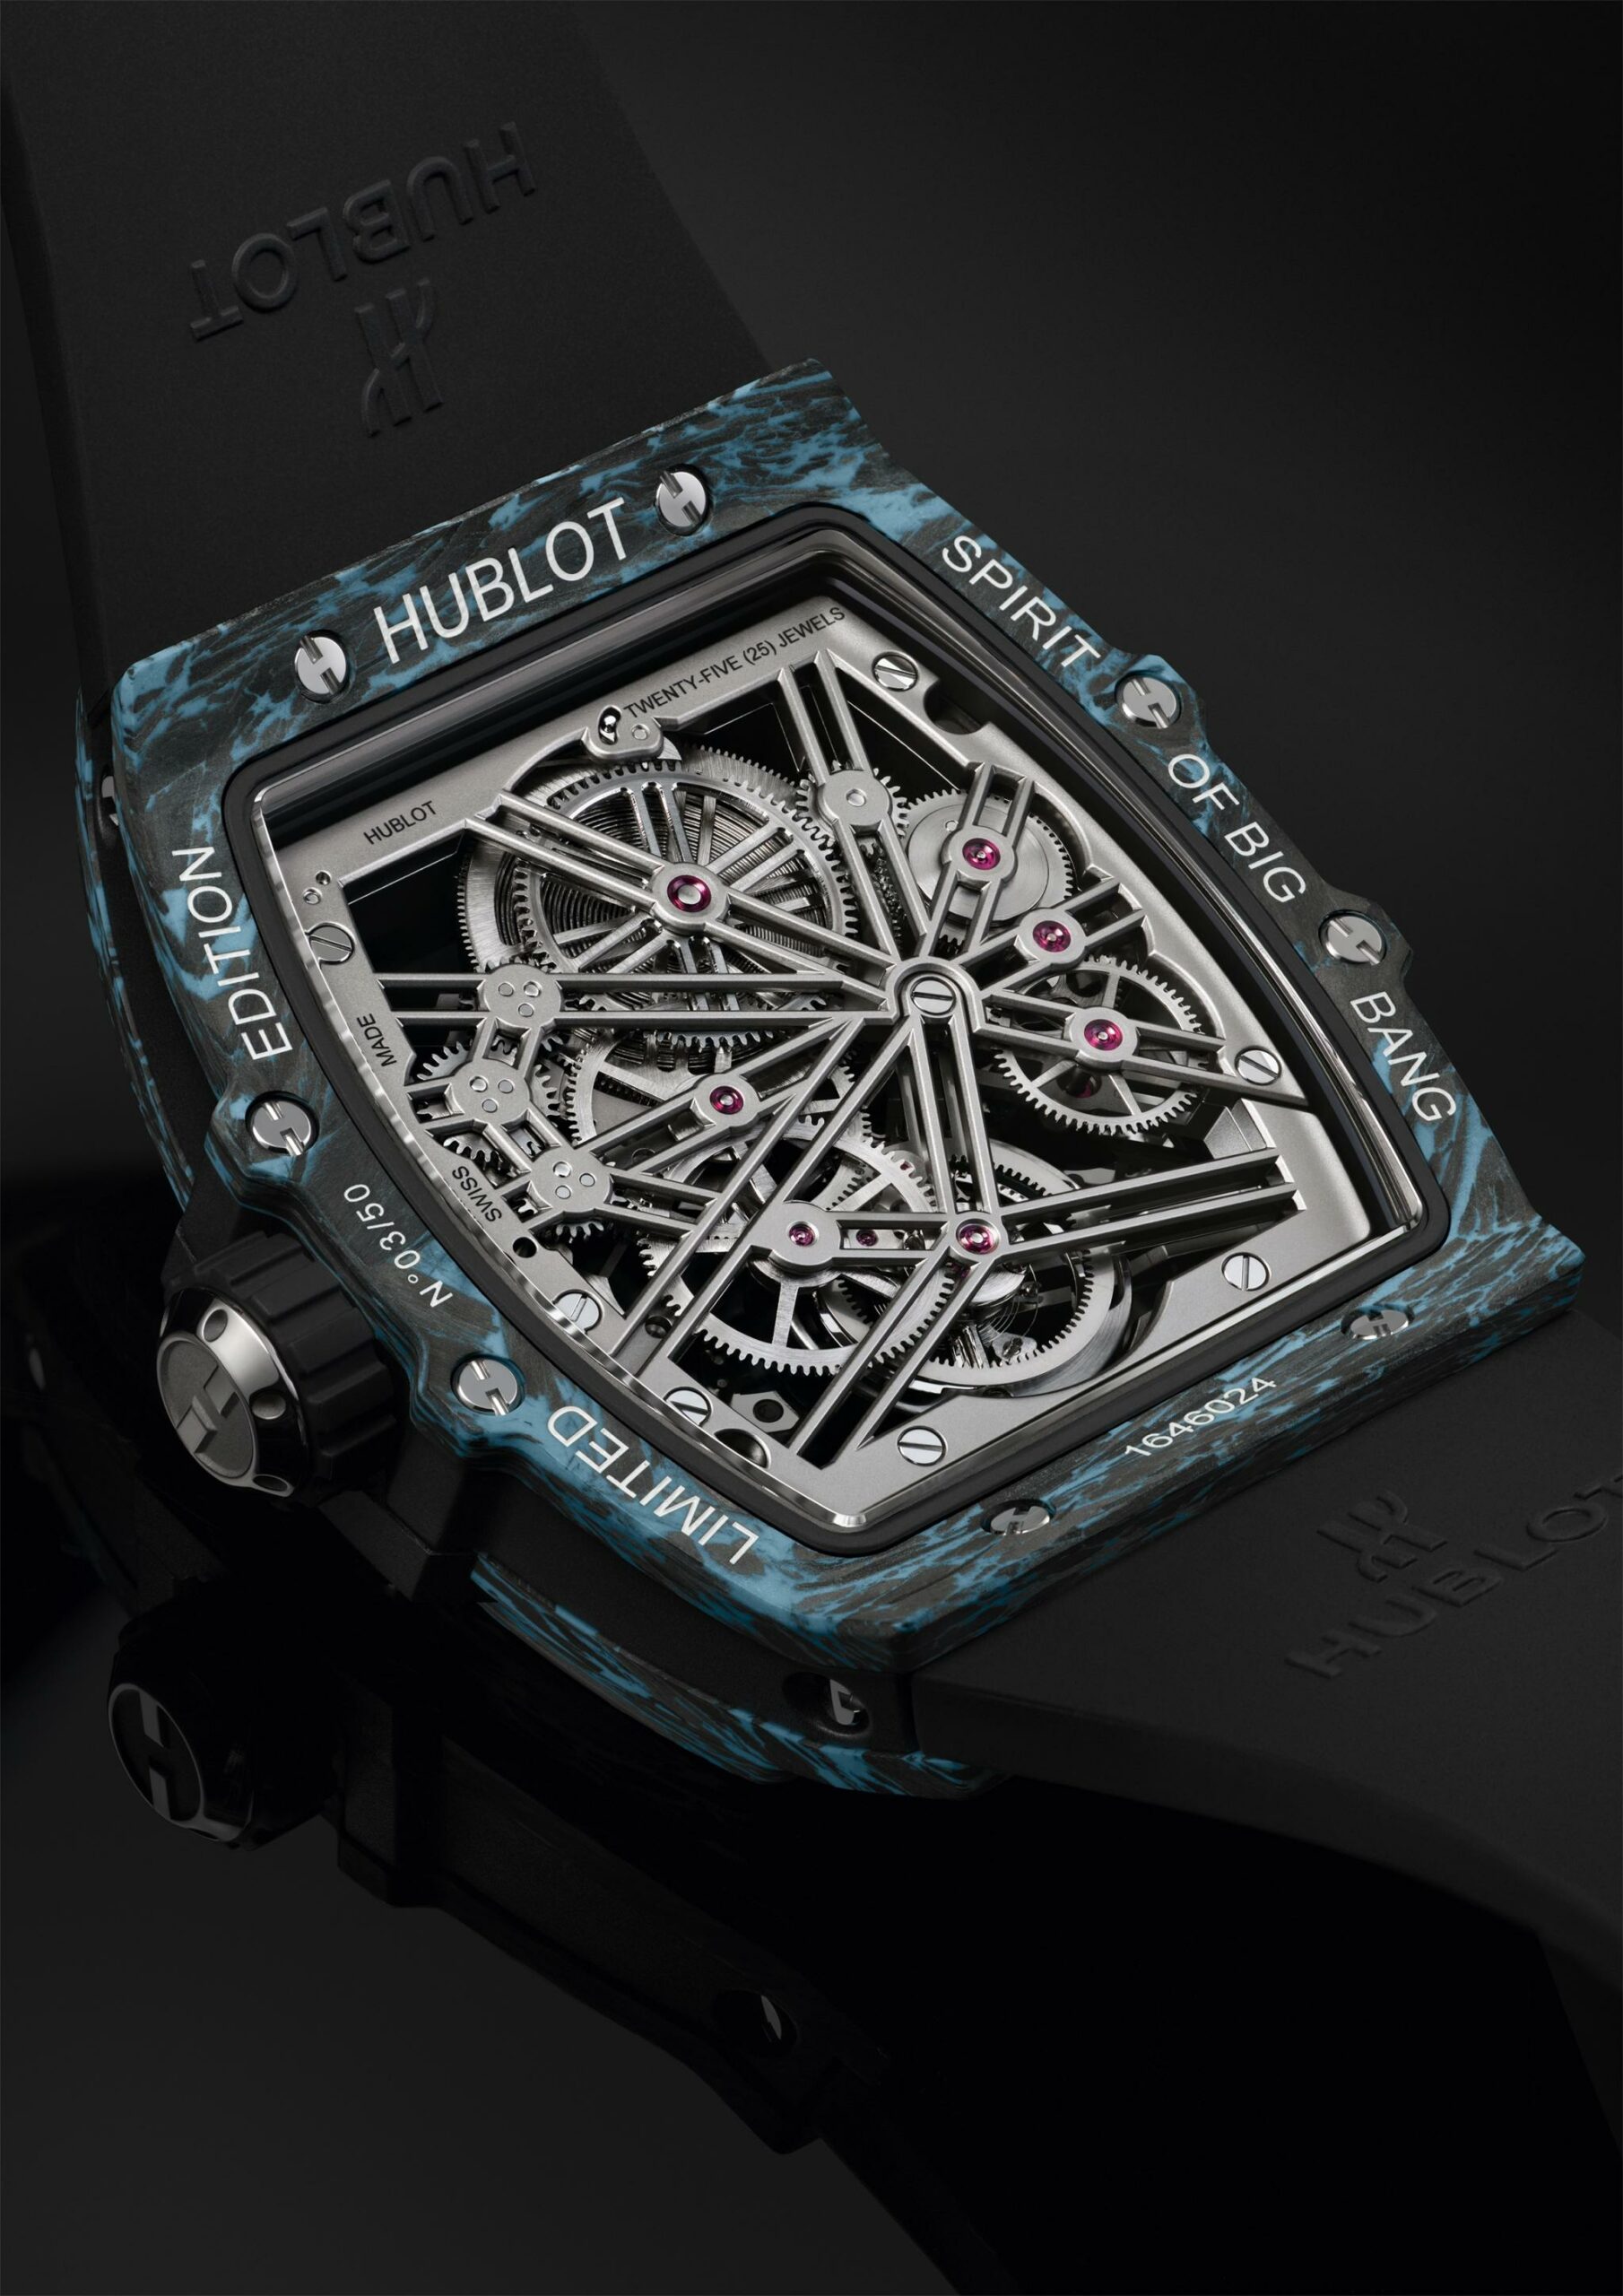 Hublot puts the Art of Fusion to the test with high-tech mechanical  innovations and groundbreaking design at LVMH Watch Week – Dubai 2020 - LVMH